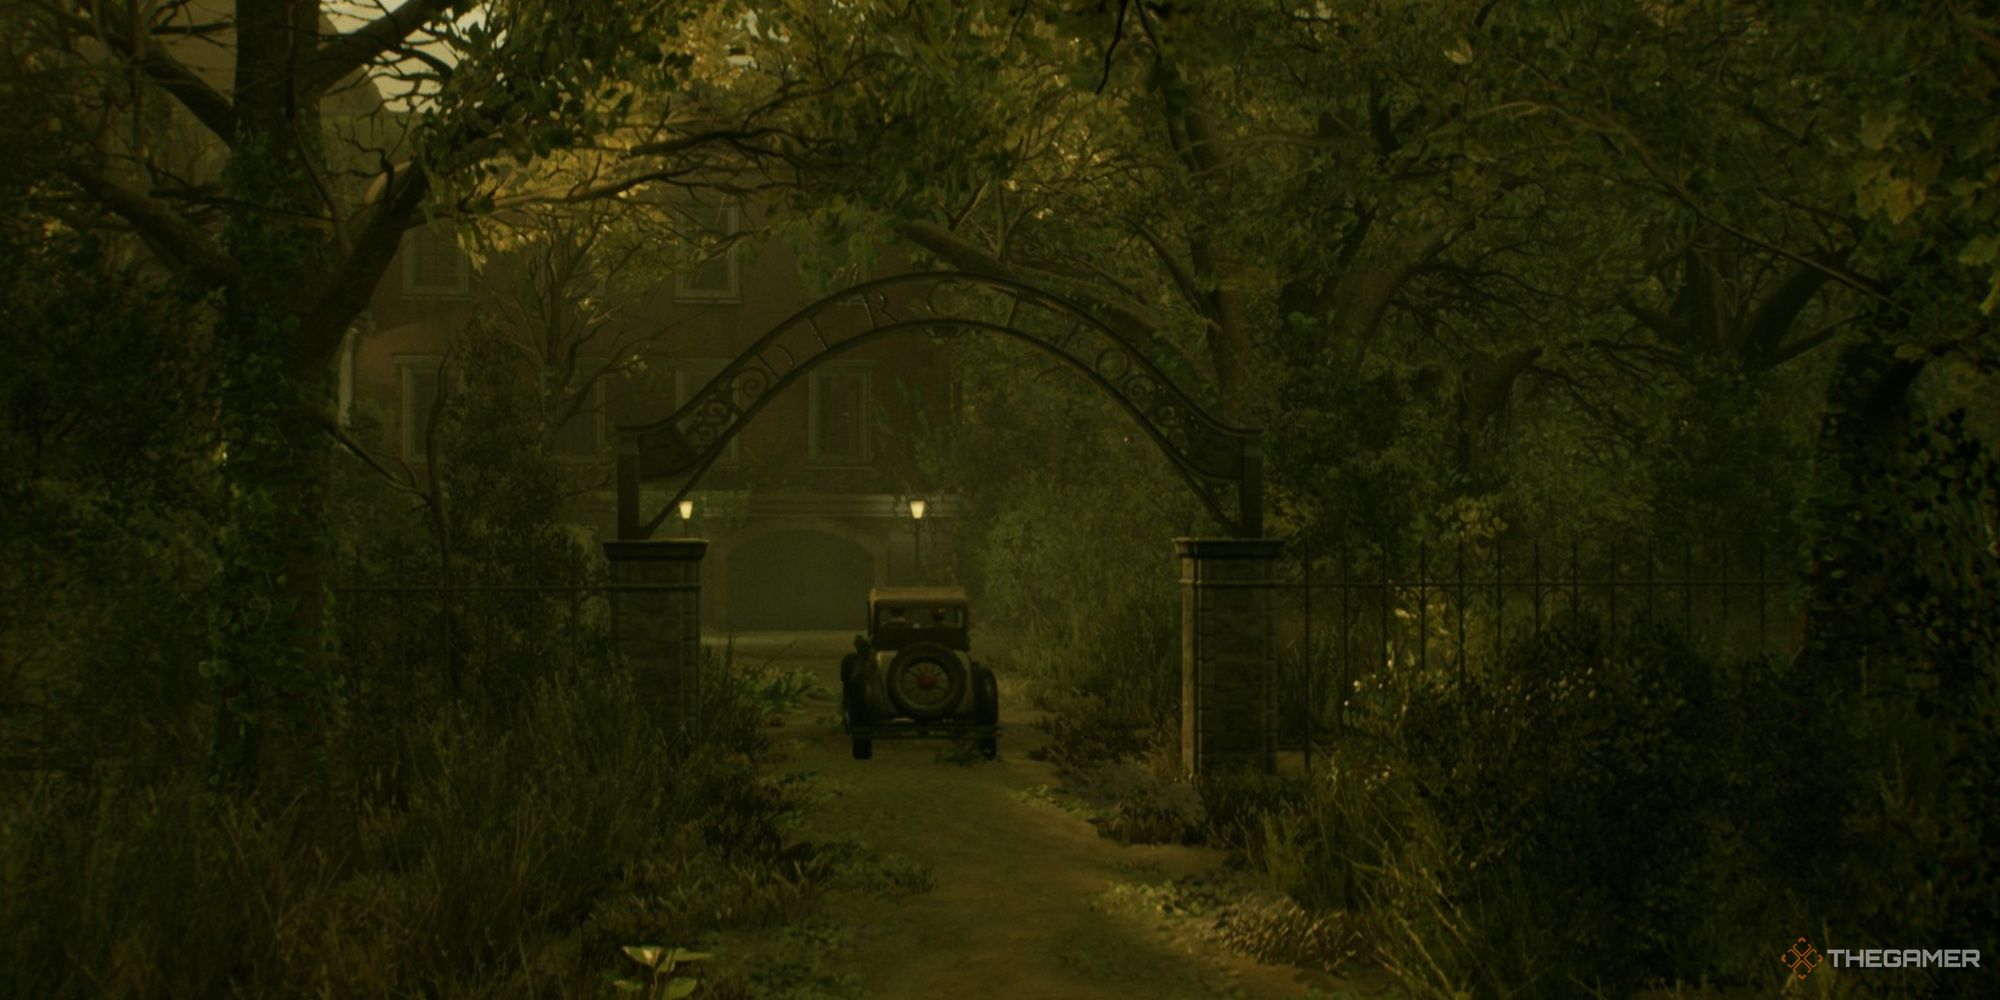 A car approaches the mansion with Emily and Edward in tow in Alone In The Dark.